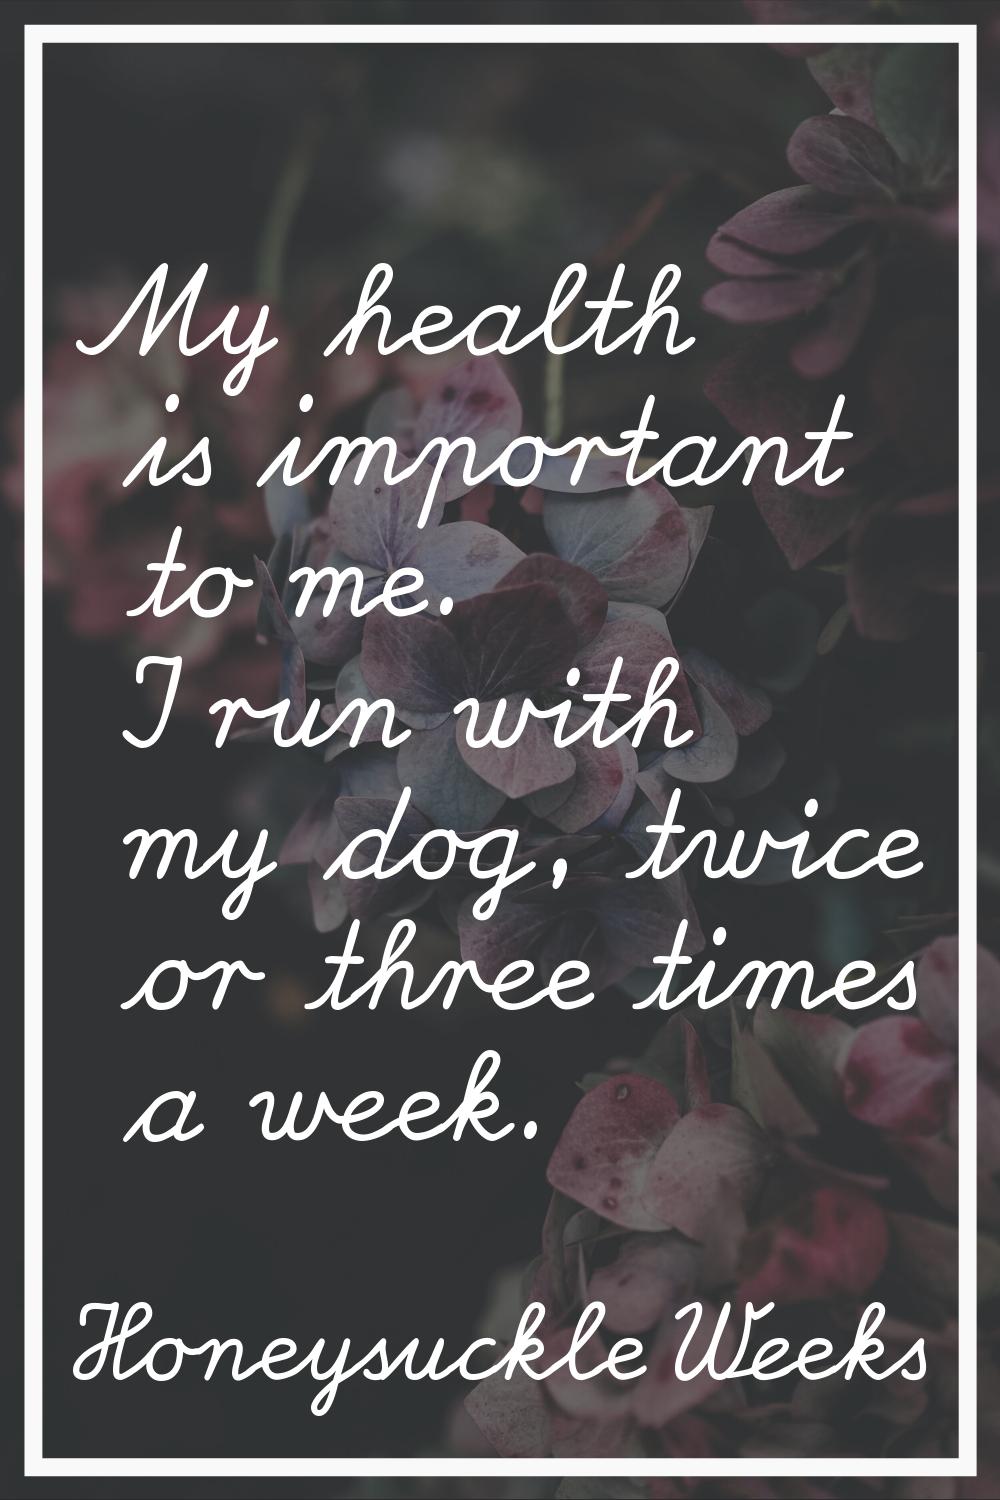 My health is important to me. I run with my dog, twice or three times a week.